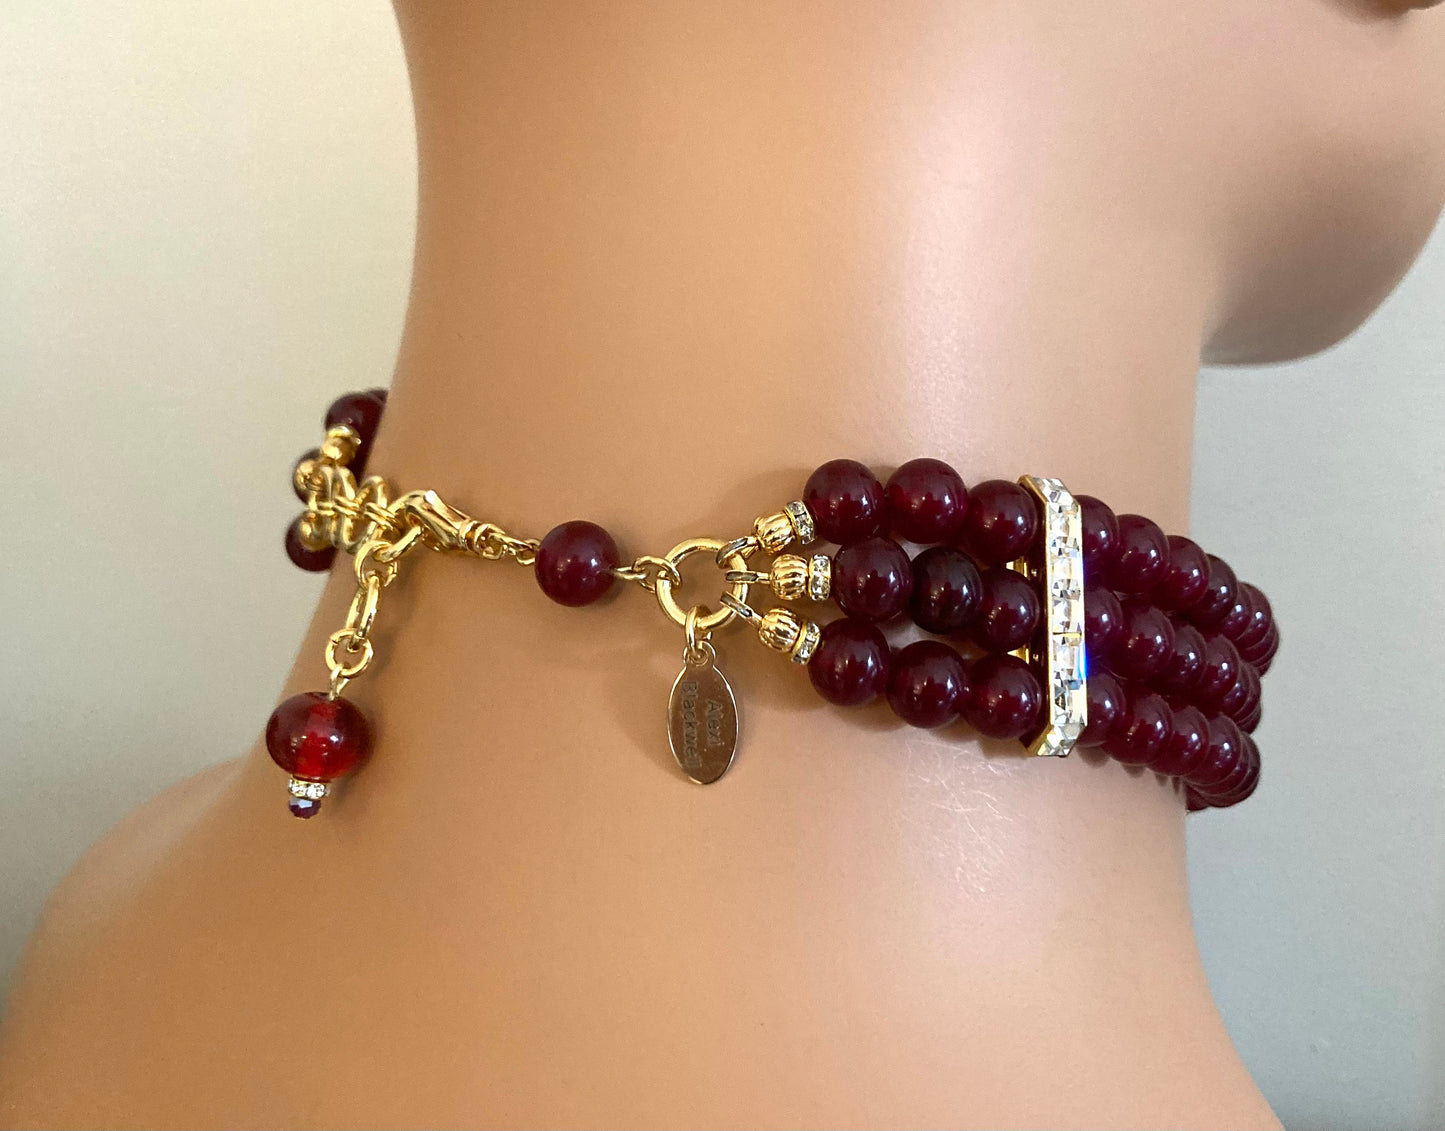 Red Choker Necklace with Gold Rhinestone bar accents adjustable made of cranberry red glass beads from Japan Cherry Brand vintage